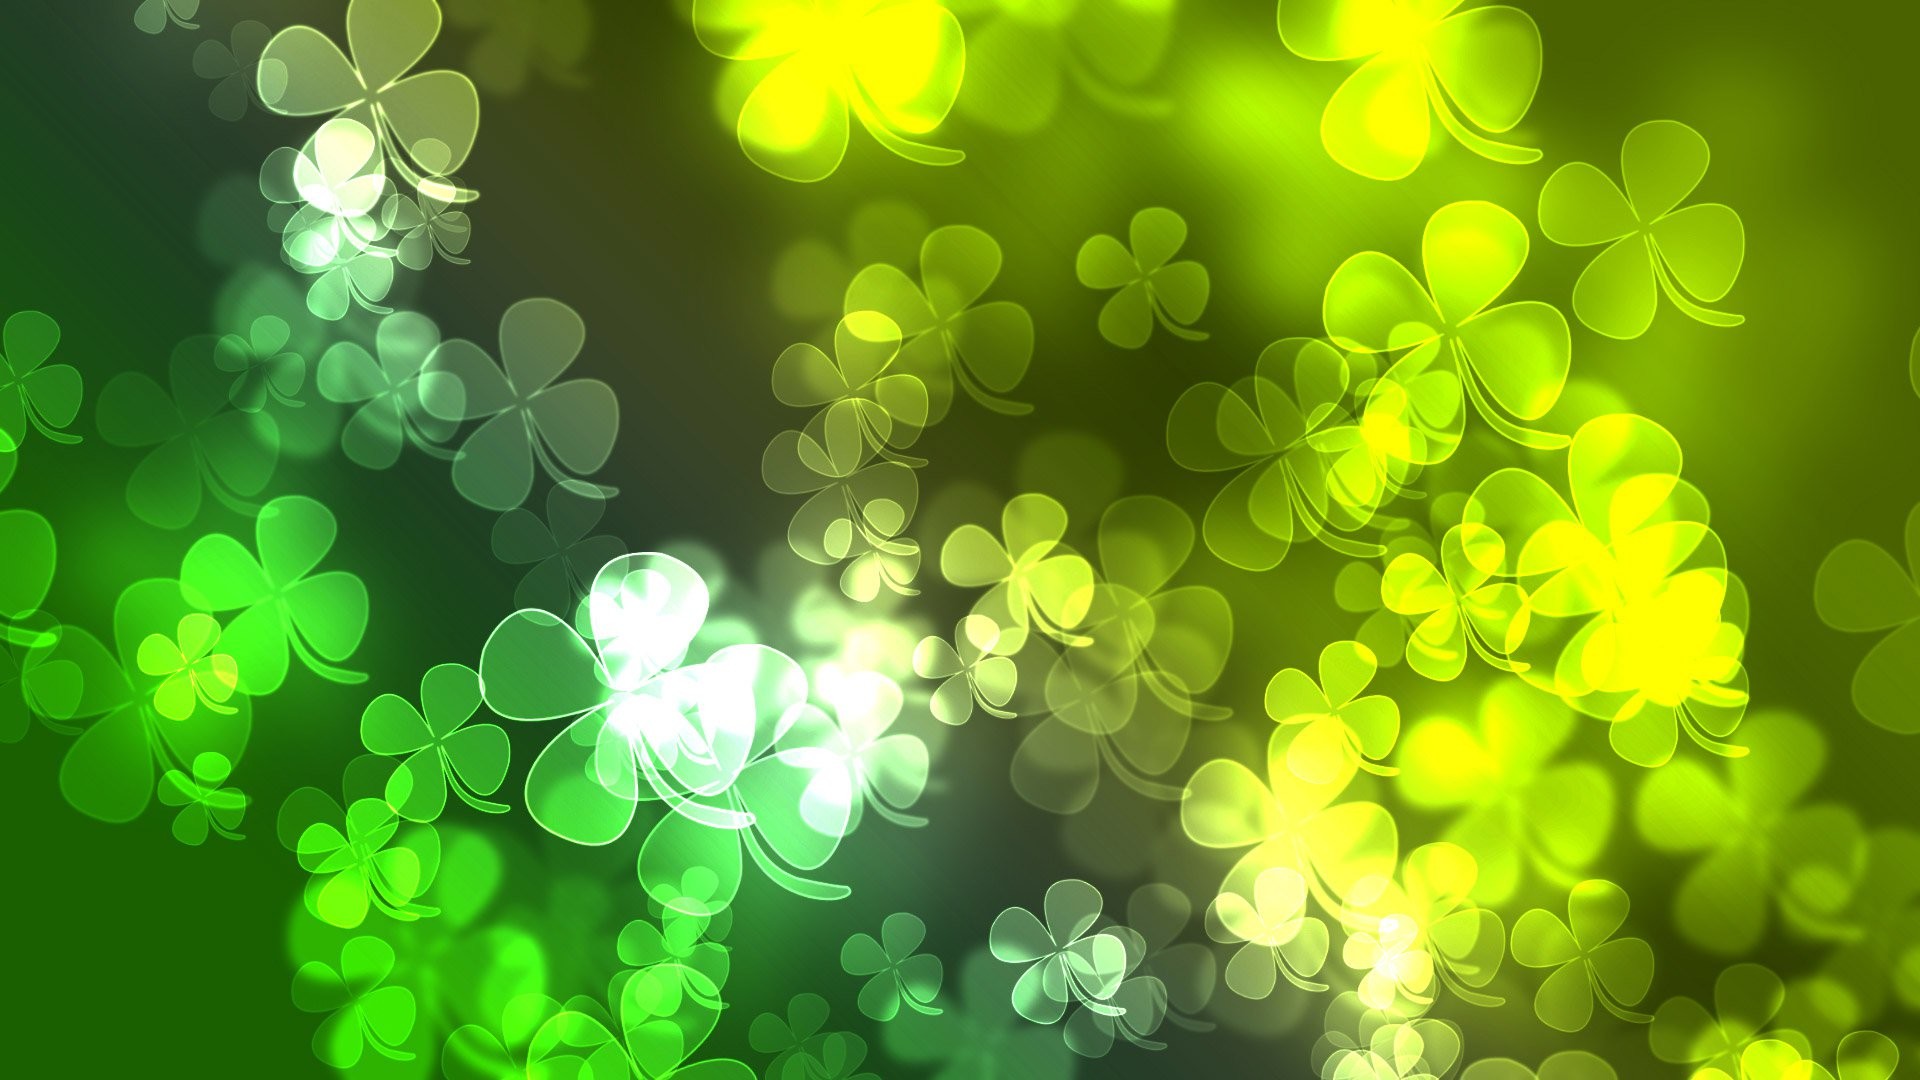 1920x1080 23 St. Patrick's Day themed wallpapers for your Android .